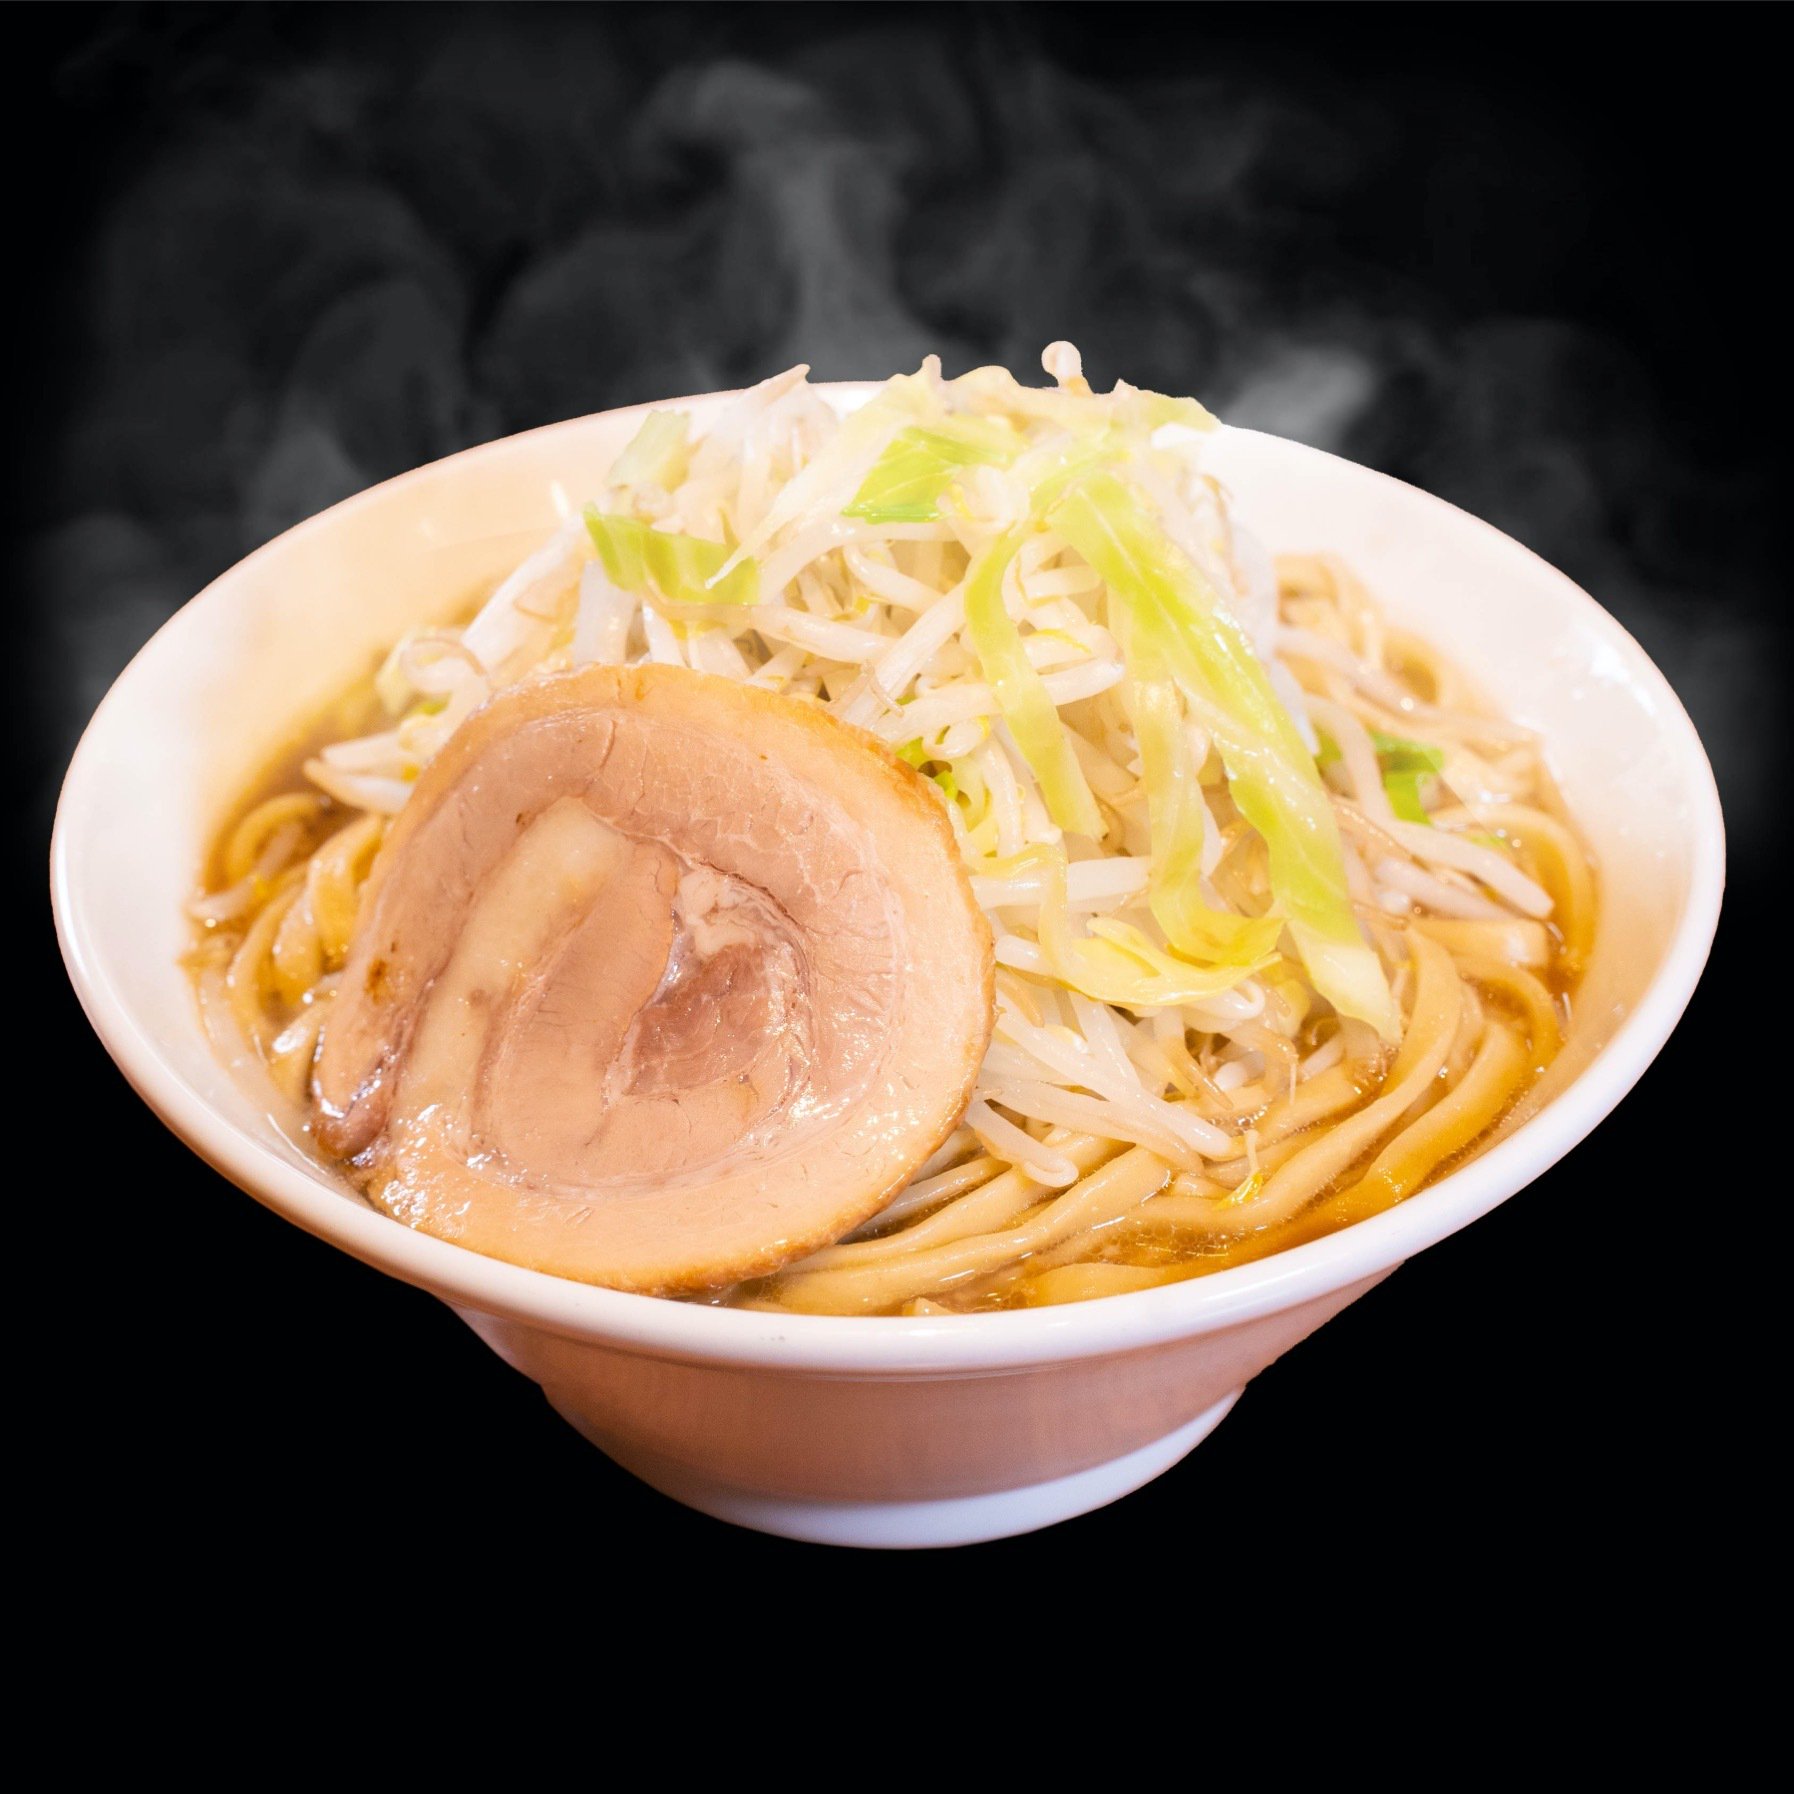 <img class='new_mark_img1' src='https://img.shop-pro.jp/img/new/icons14.gif' style='border:none;display:inline;margin:0px;padding:0px;width:auto;' />豚ラーメン　１食（冷凍）の商品画像